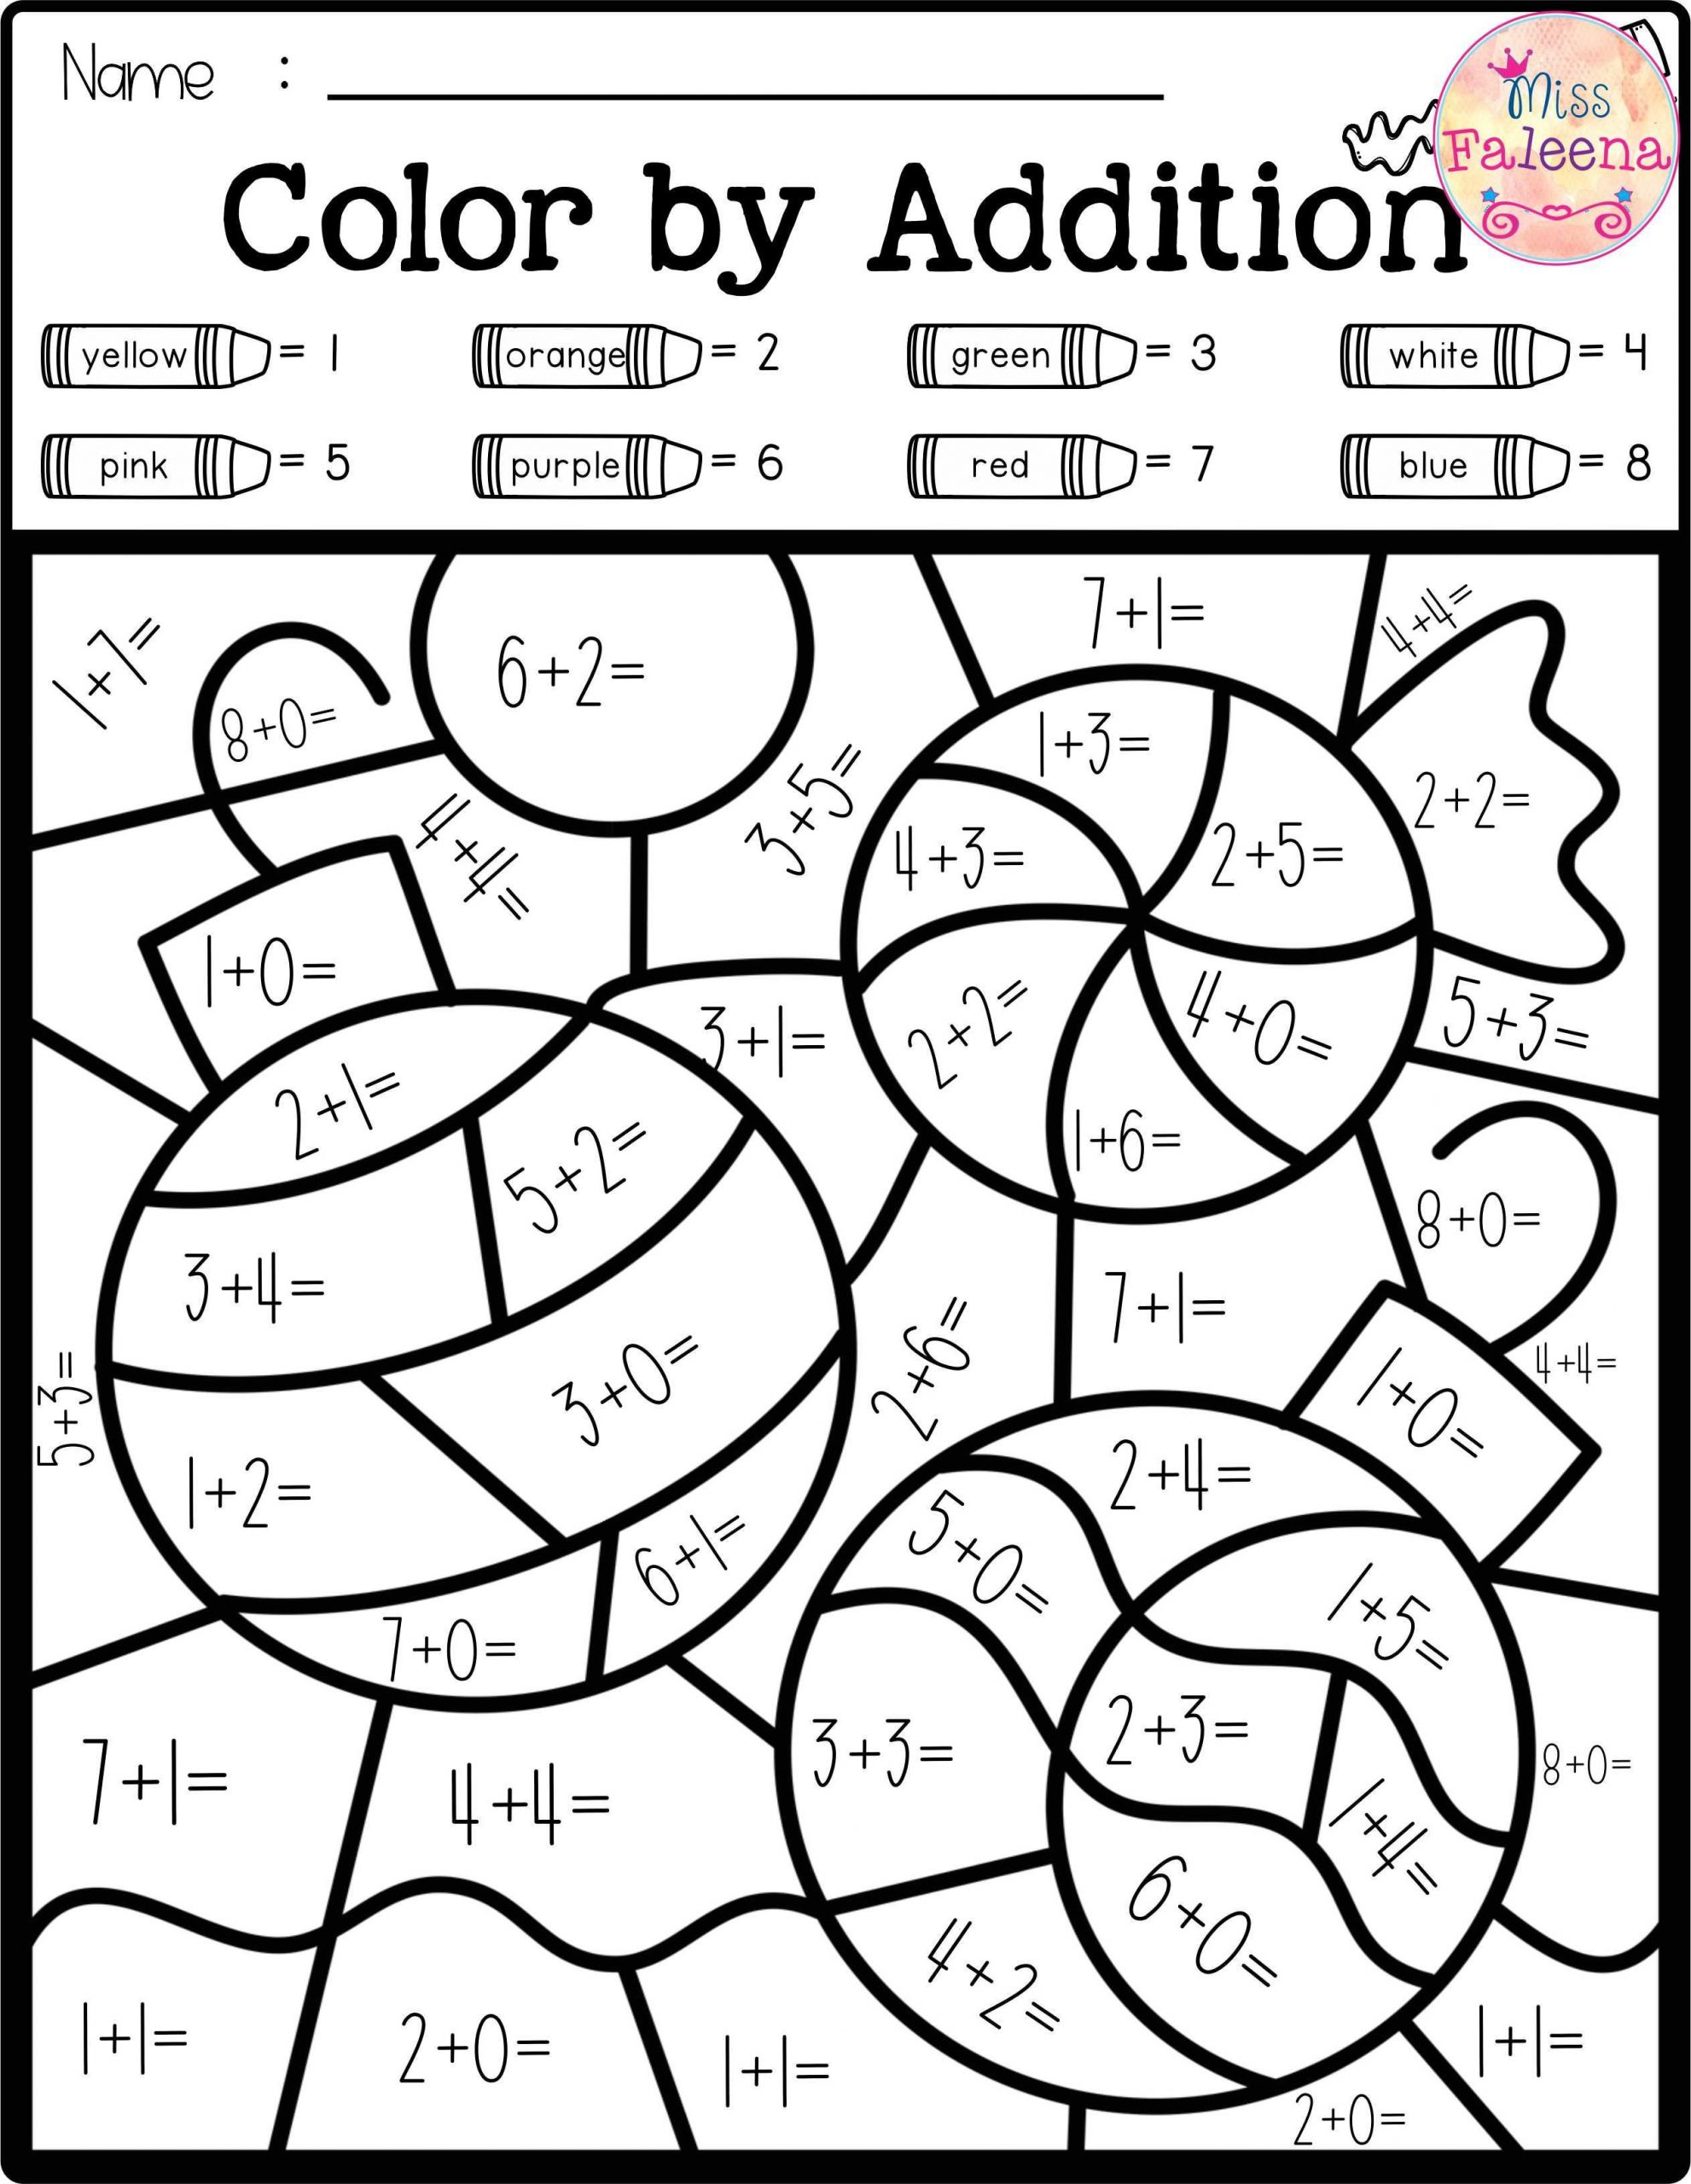 Free Math Worksheets Third Grade 3 Addition Add 3 Digit Numbers In Columns with Regrouping